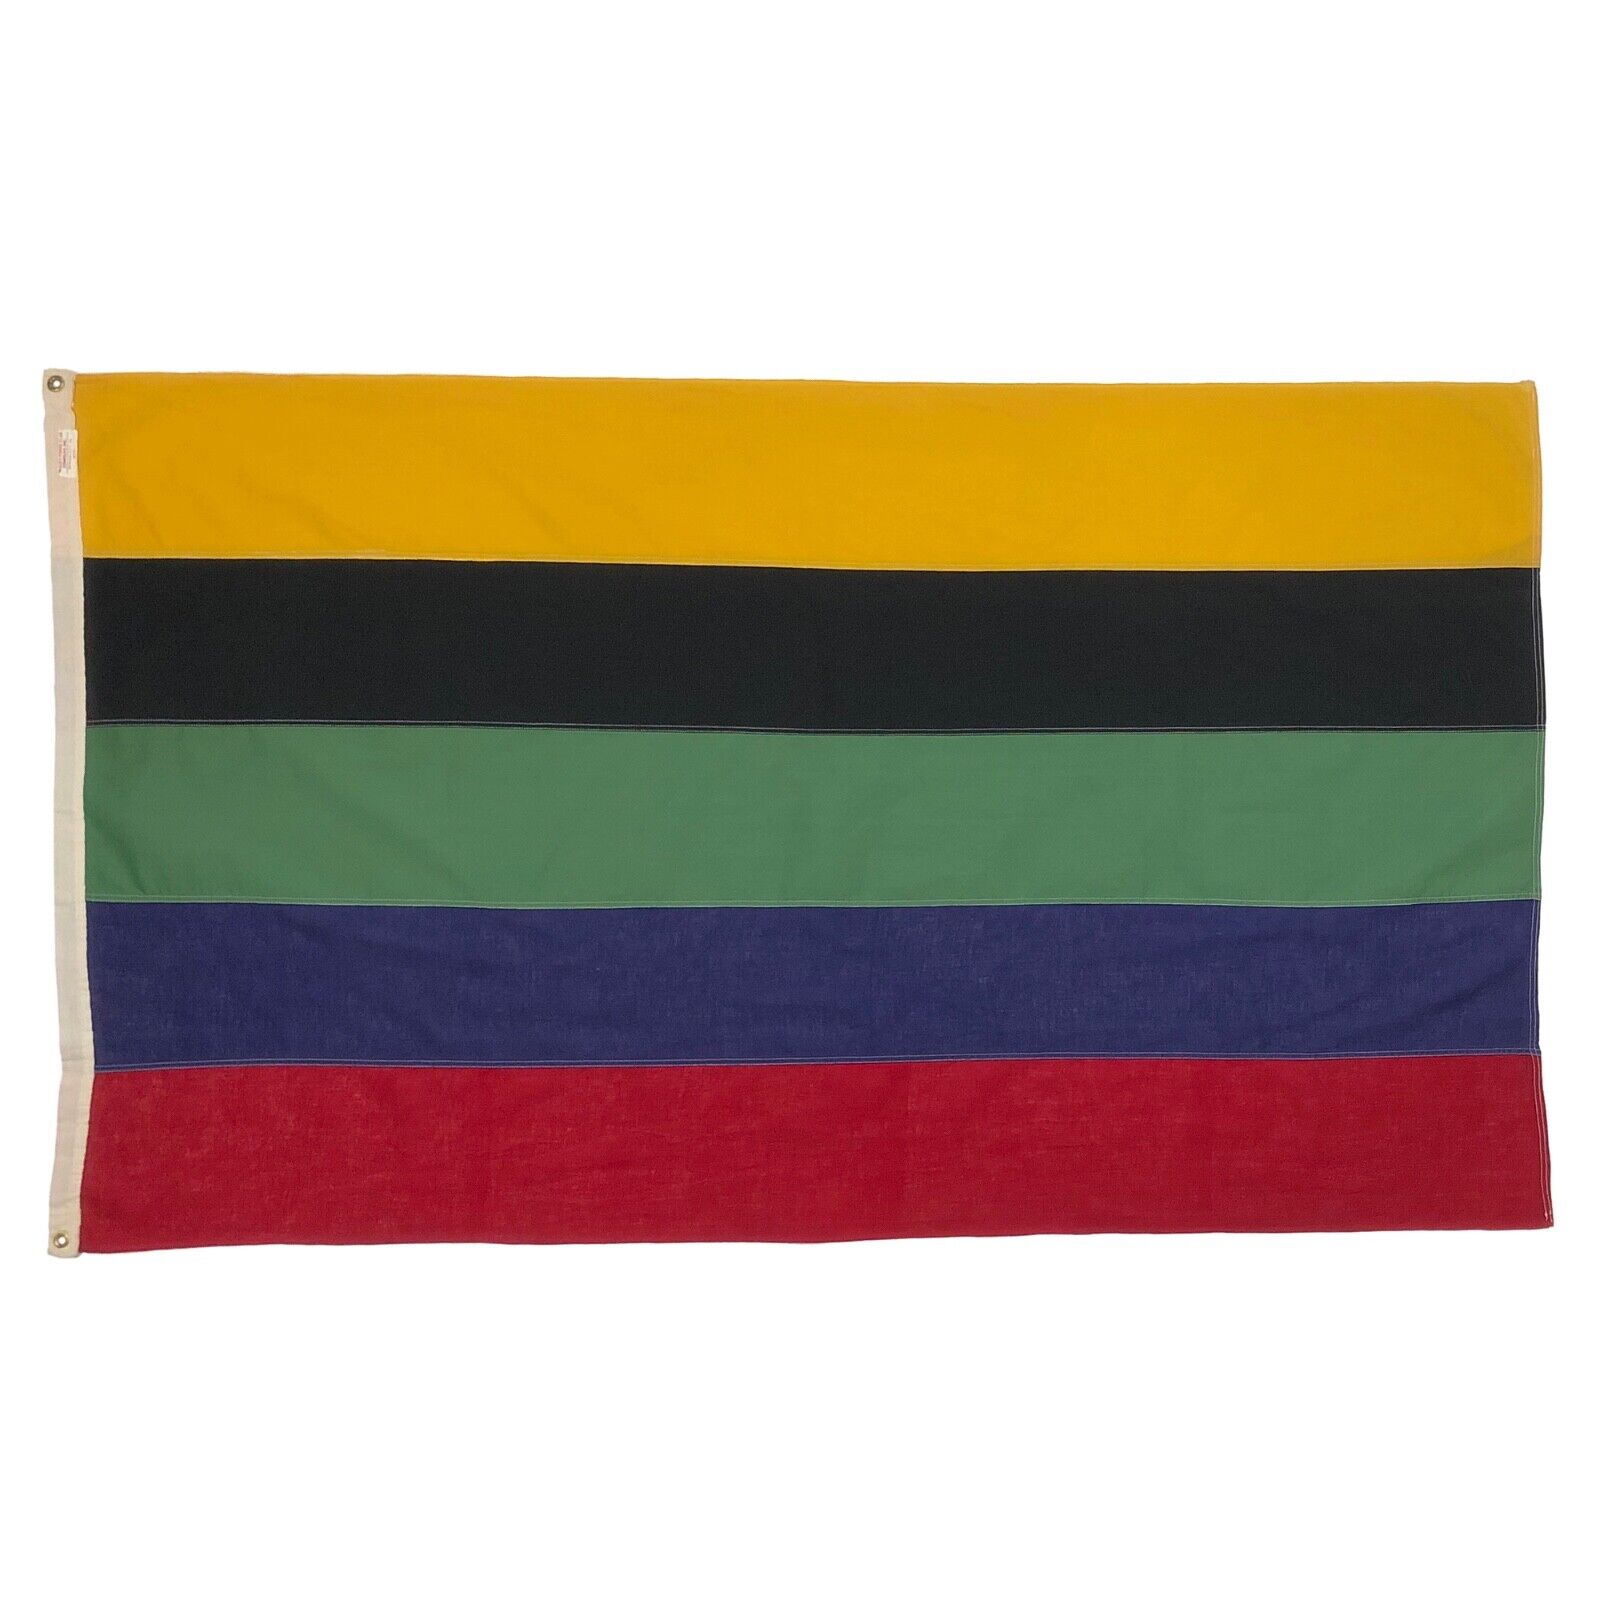 Vintage Cotton Unidentified Striped Signal Flag Nautical Scout Colorful Campfire